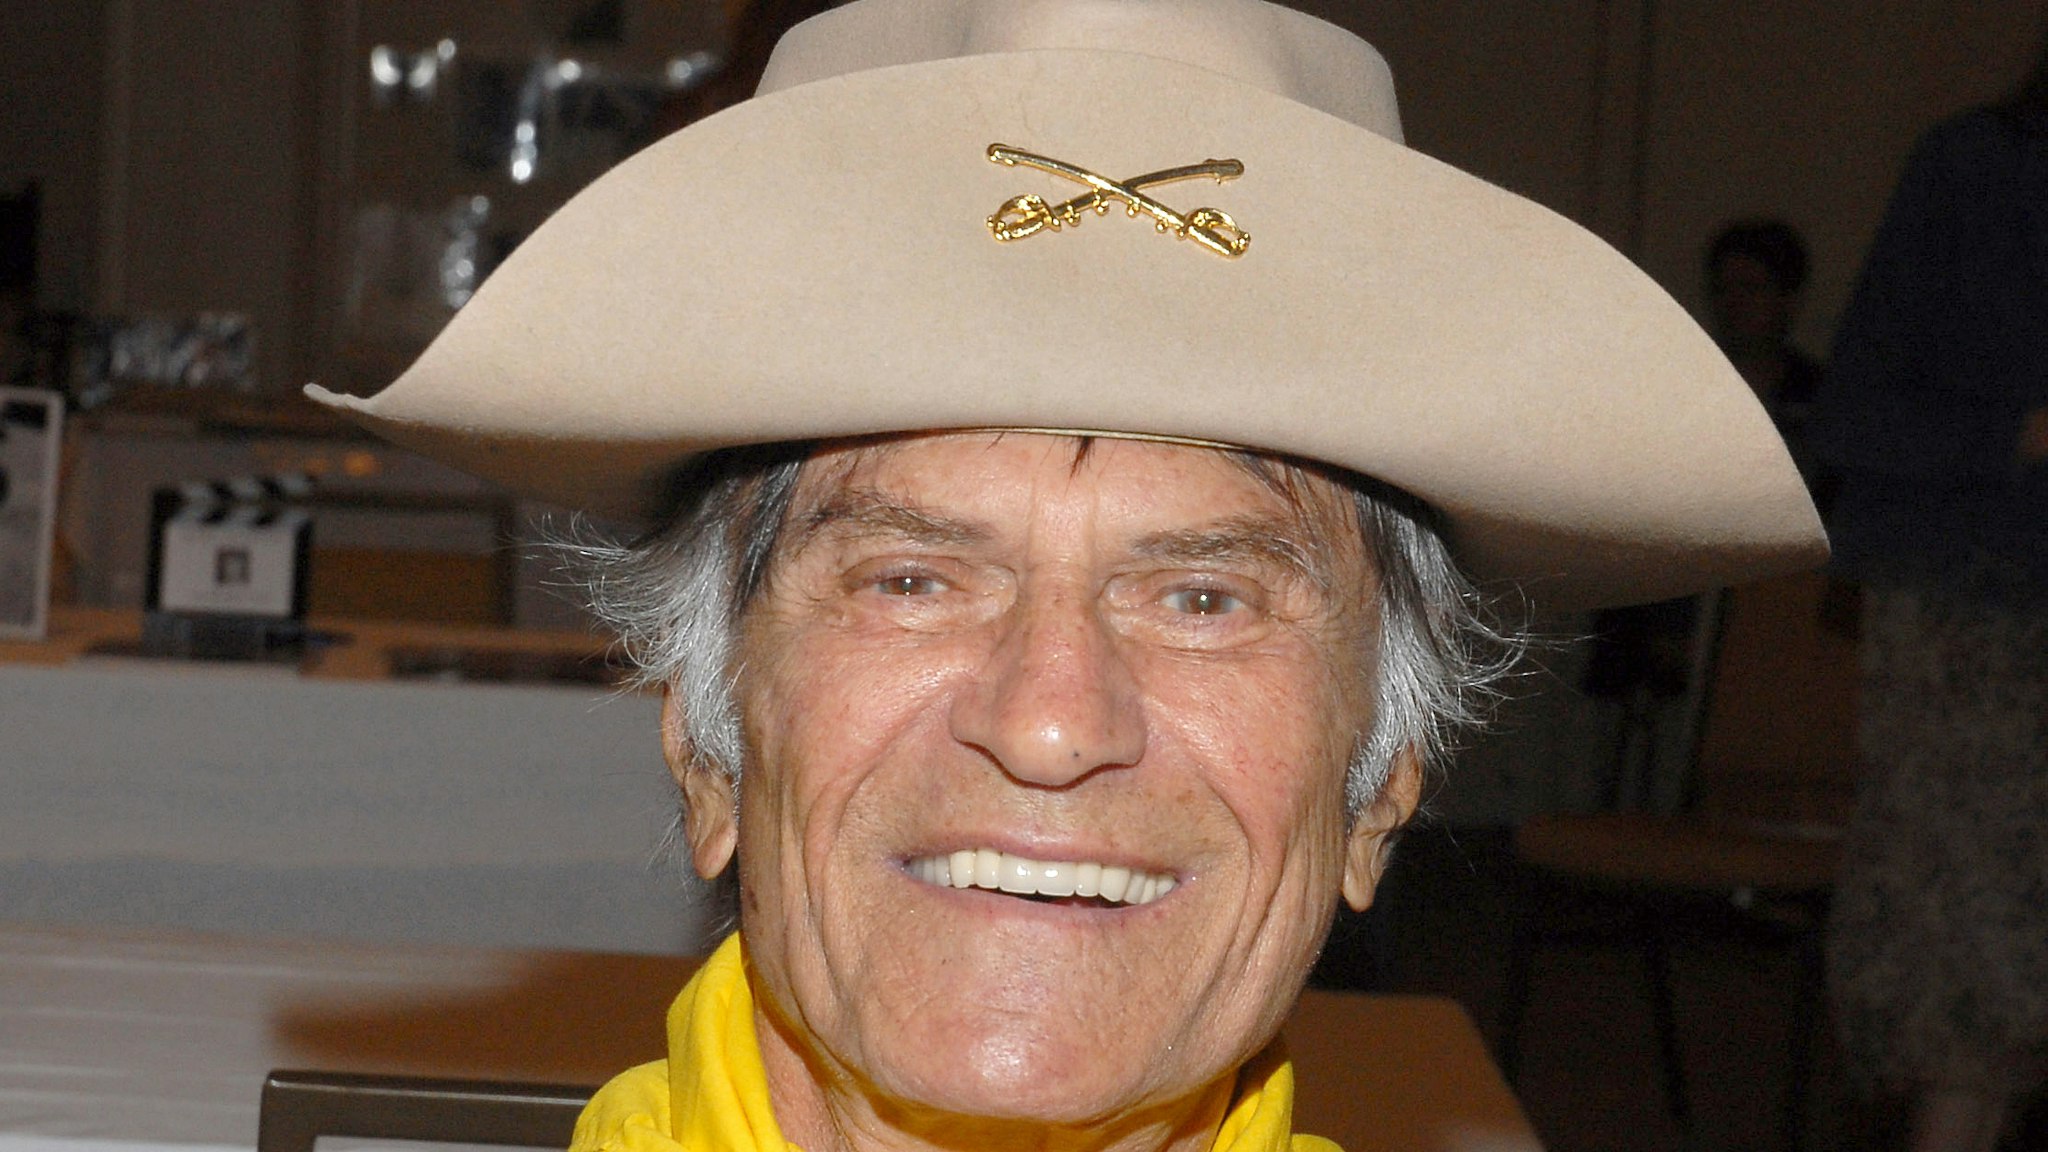 Larry Storch at the 2007 Twilight Zone Convention, Hilton Hasbrook Heights, Sunday August 5 2007